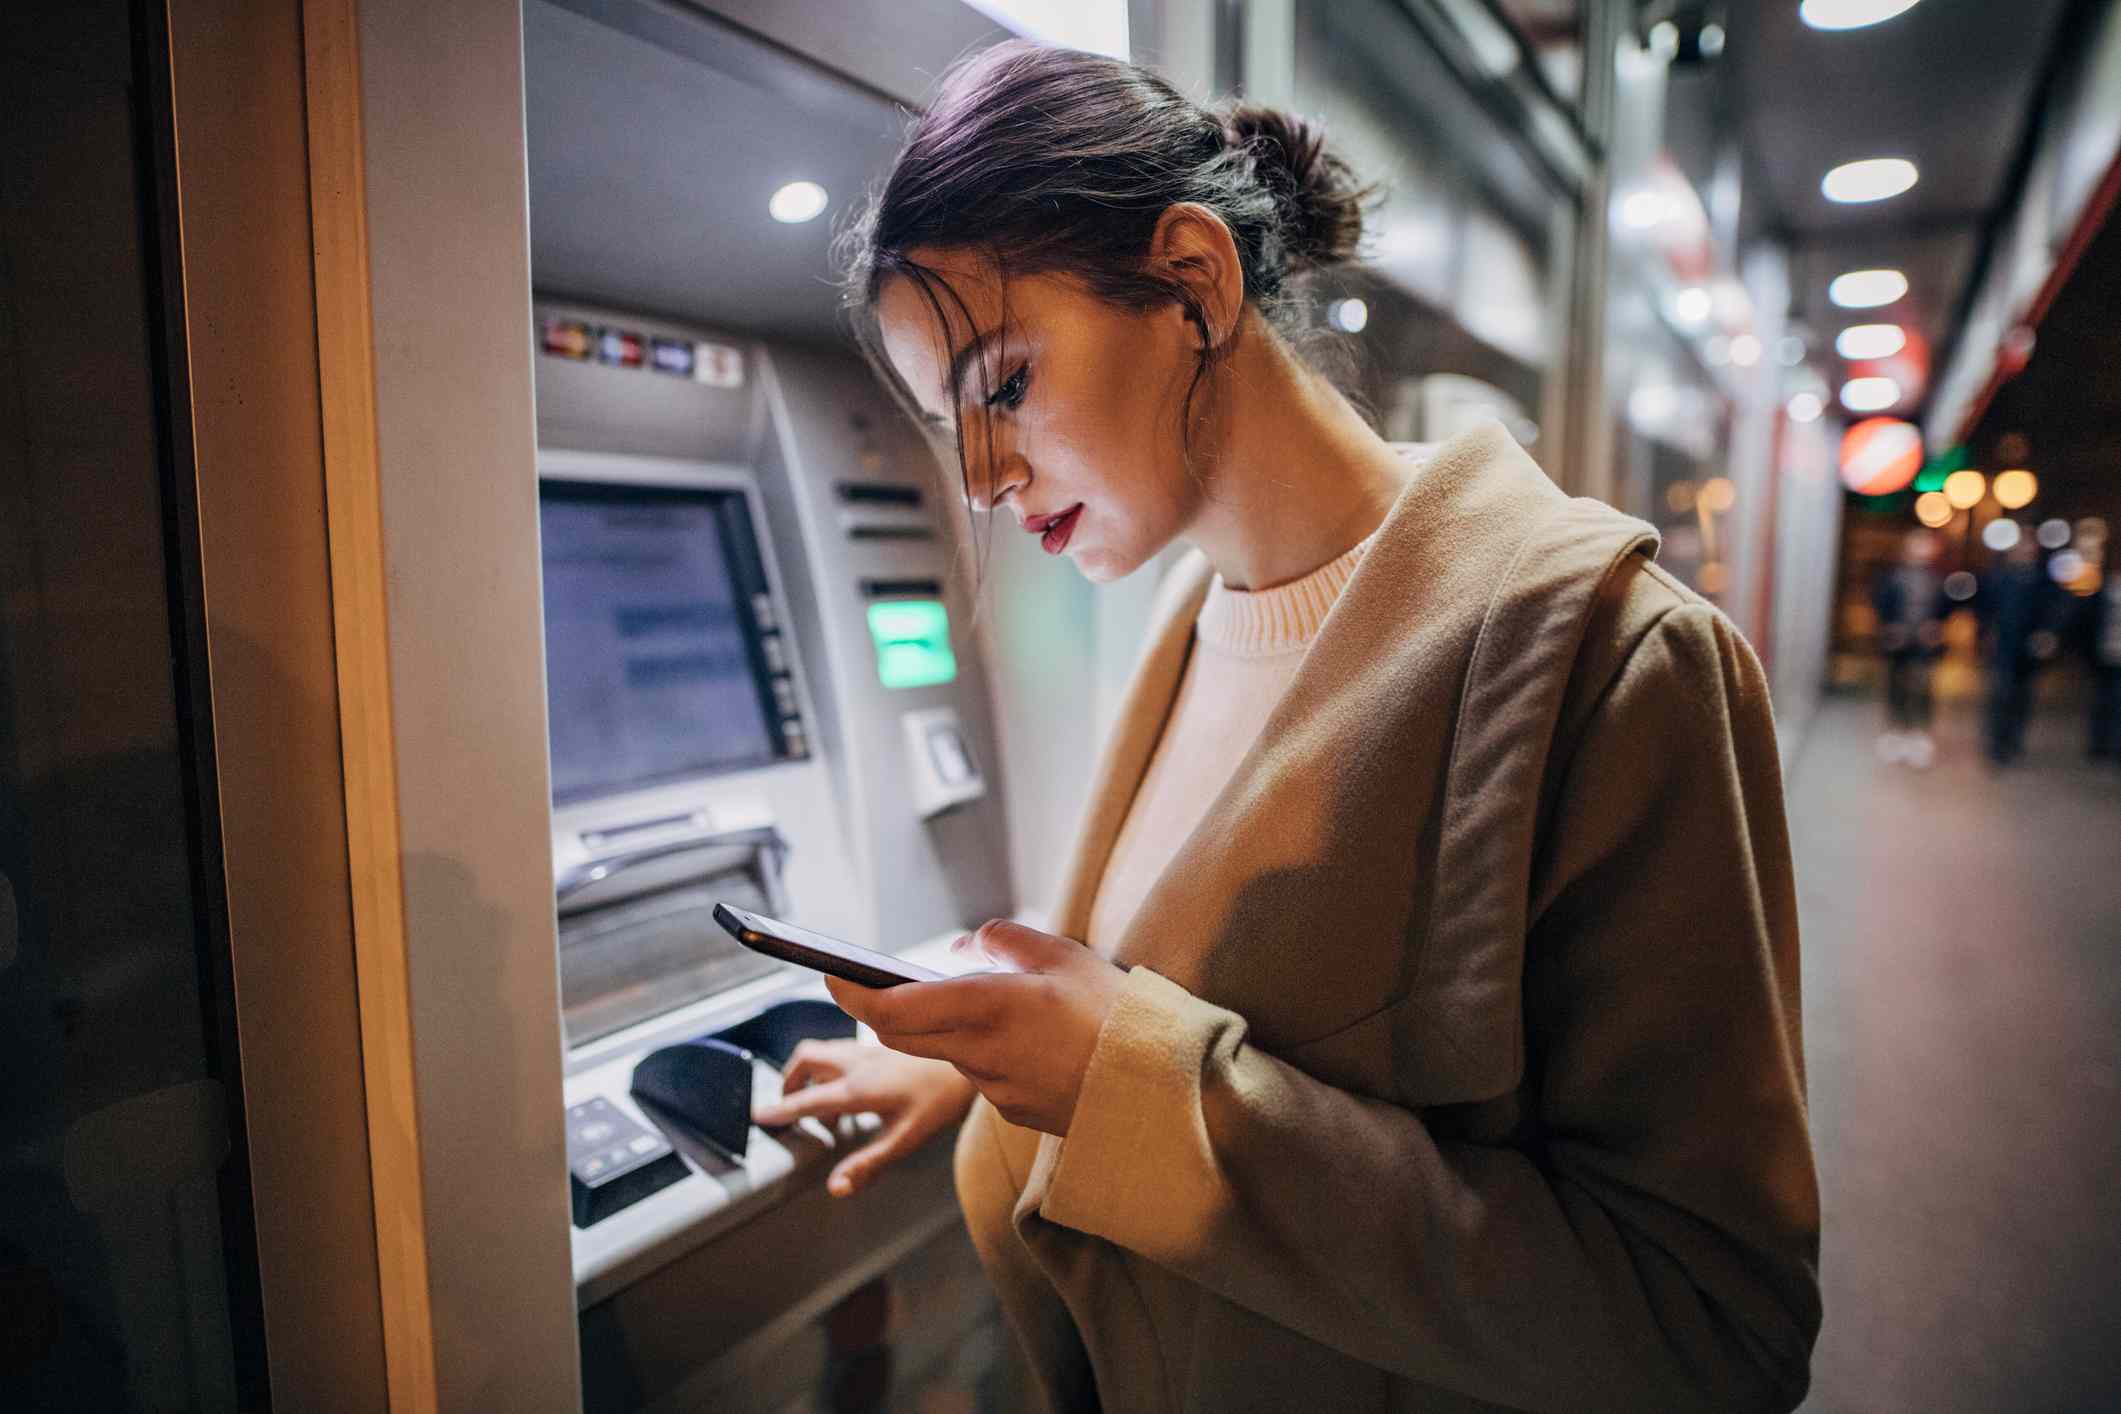 A person makes a transaction at an ATM.